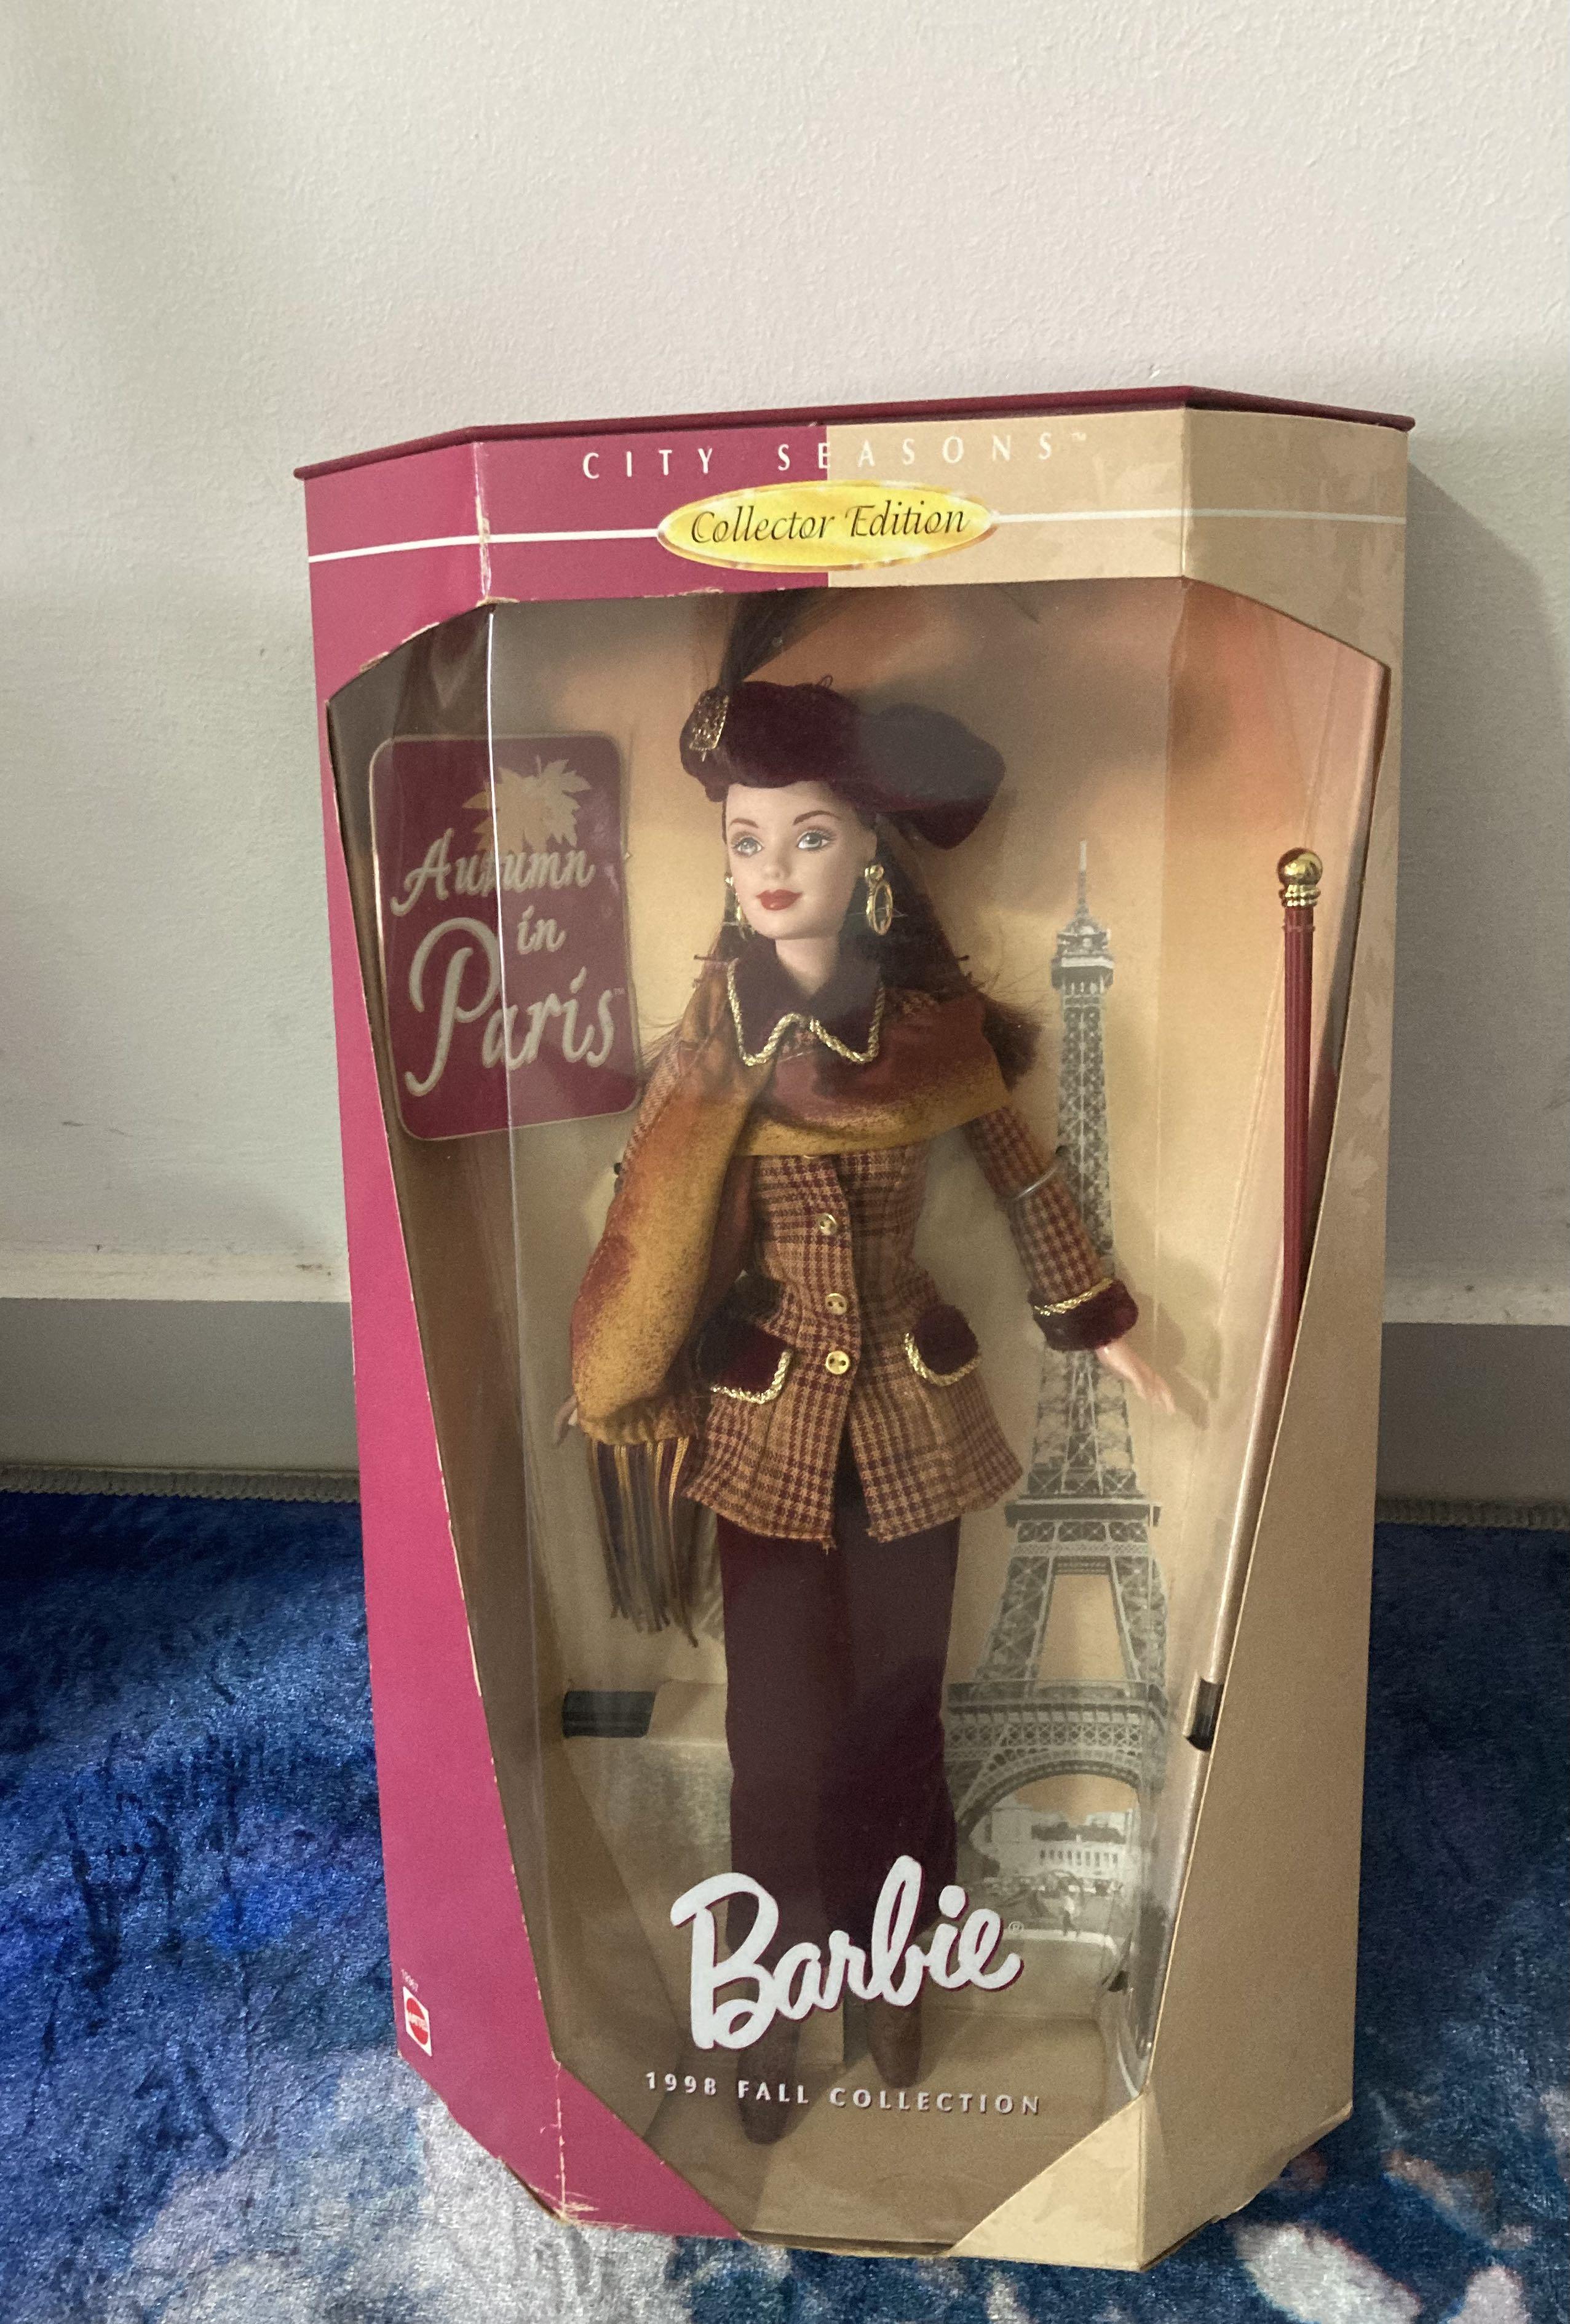 Barbie City Seasons “Autumn in Paris” 1998 Fall Collection, Collector’s Edition